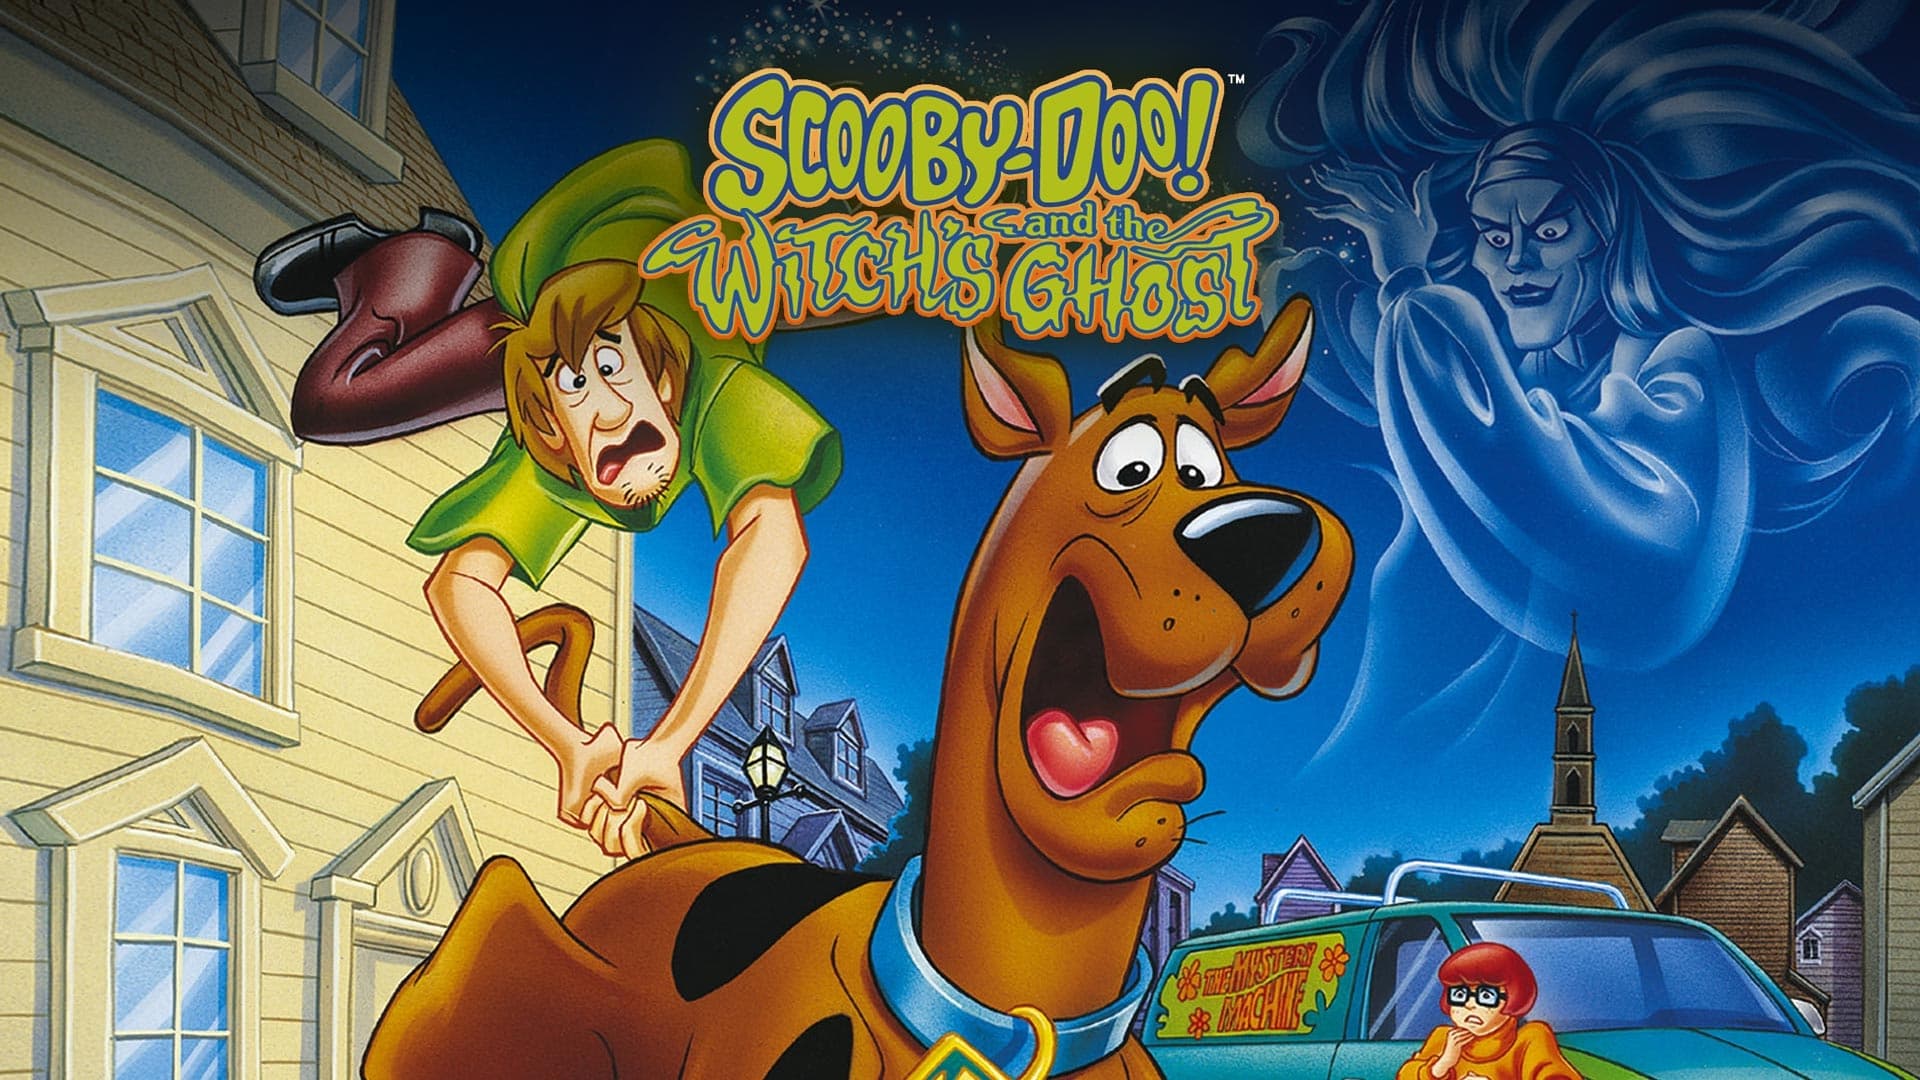 Scooby-Doo! and the Witch's Ghost (1999)